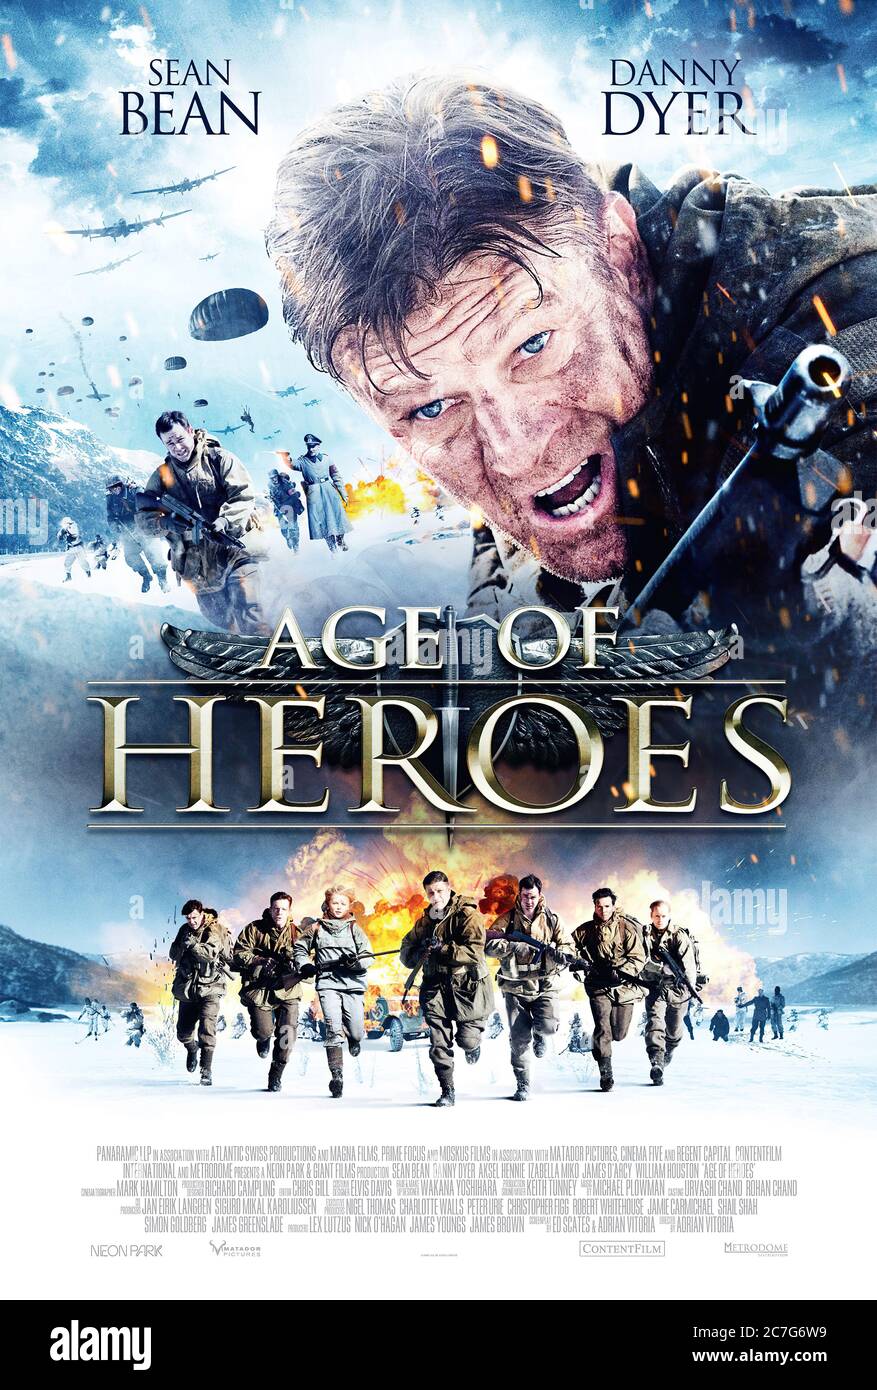 Age of Heroes - Movie Poster Stock Photo